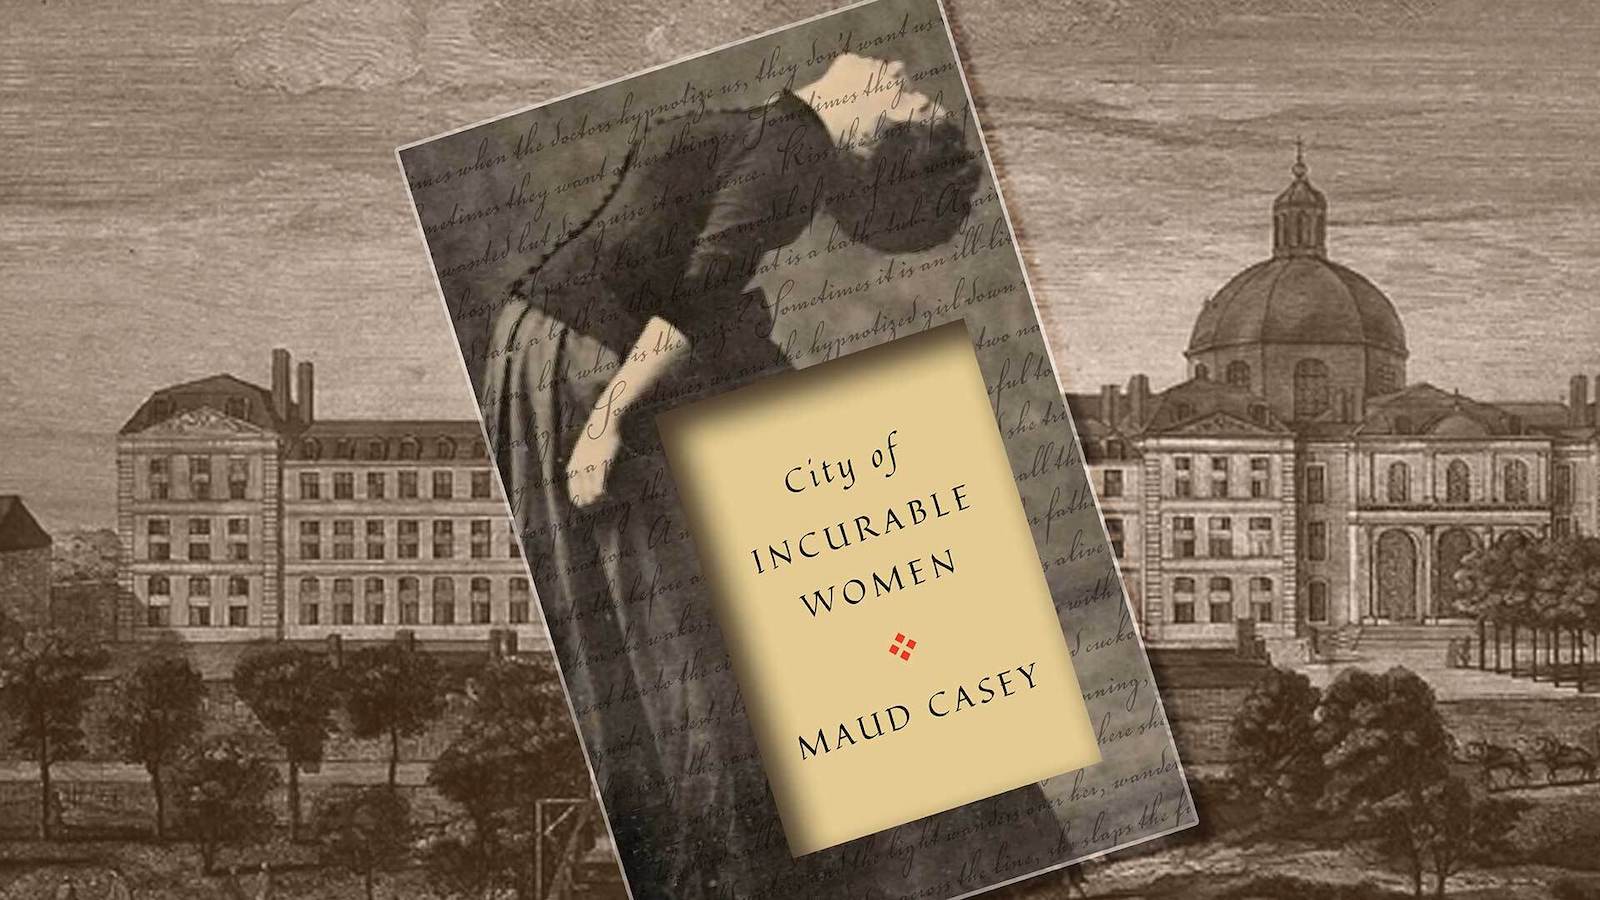 image of Maud Casey's book cover for "City of Incurable Women"